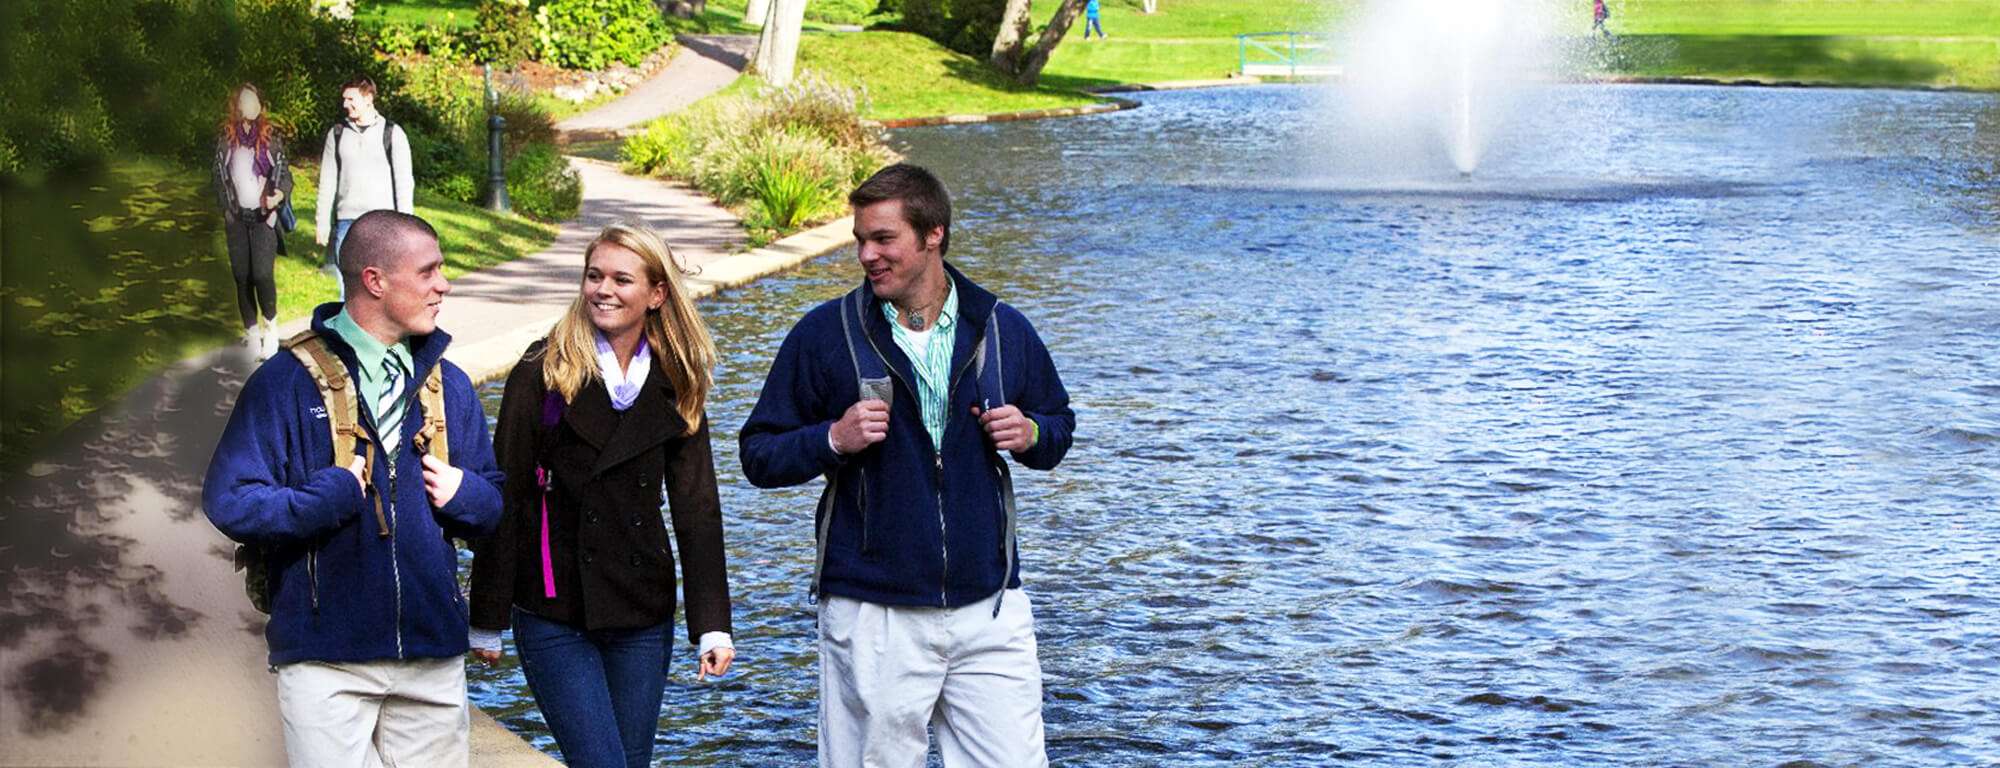 two young men and a young woman walking and talking on a path near a pond with a fountain